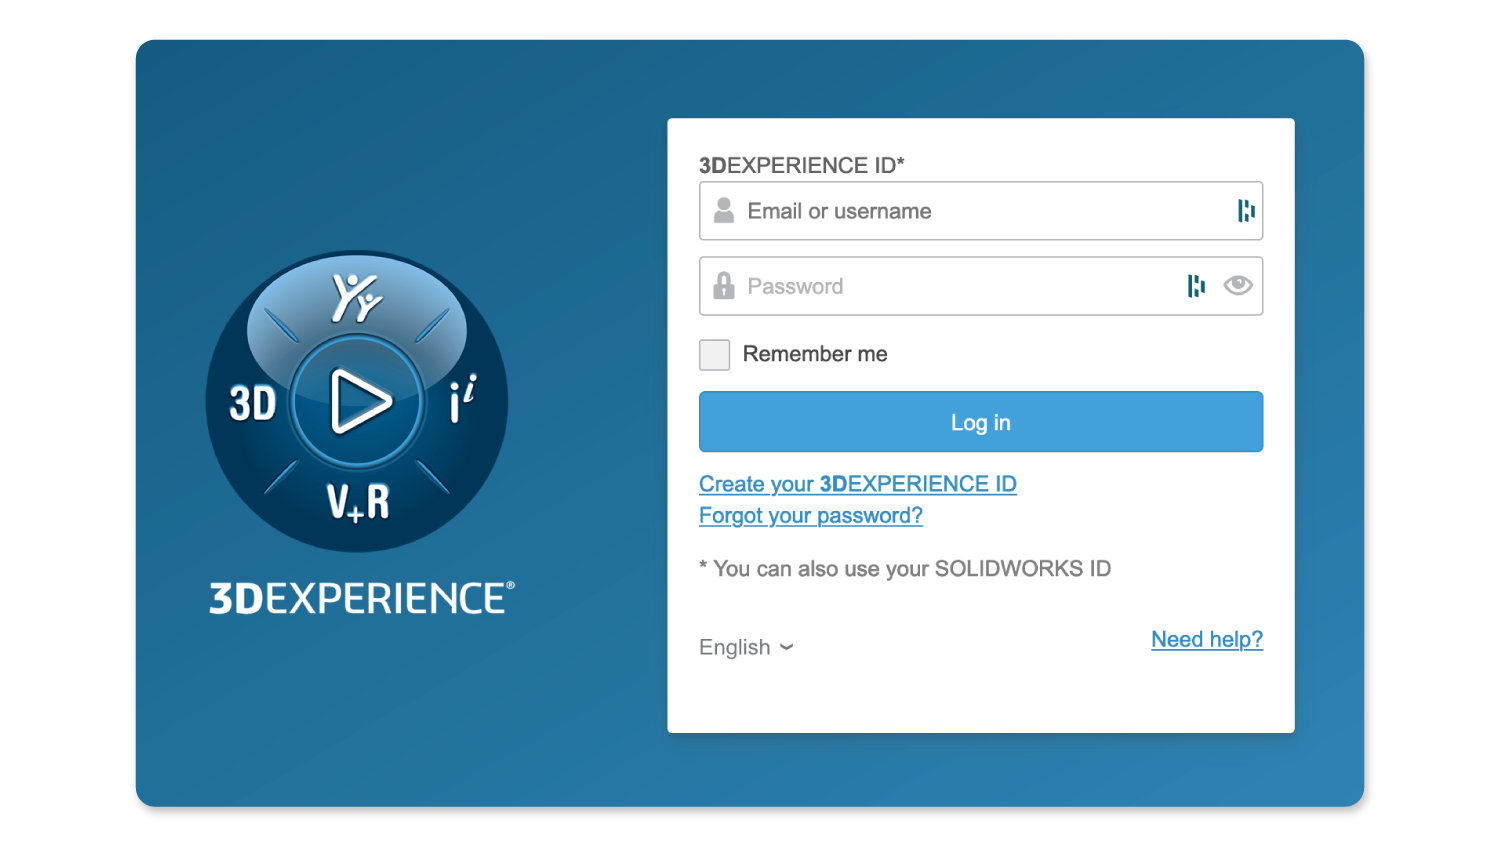 3DEXPERIENCE secure web login is the key to achieving a talented, borderless workforce.